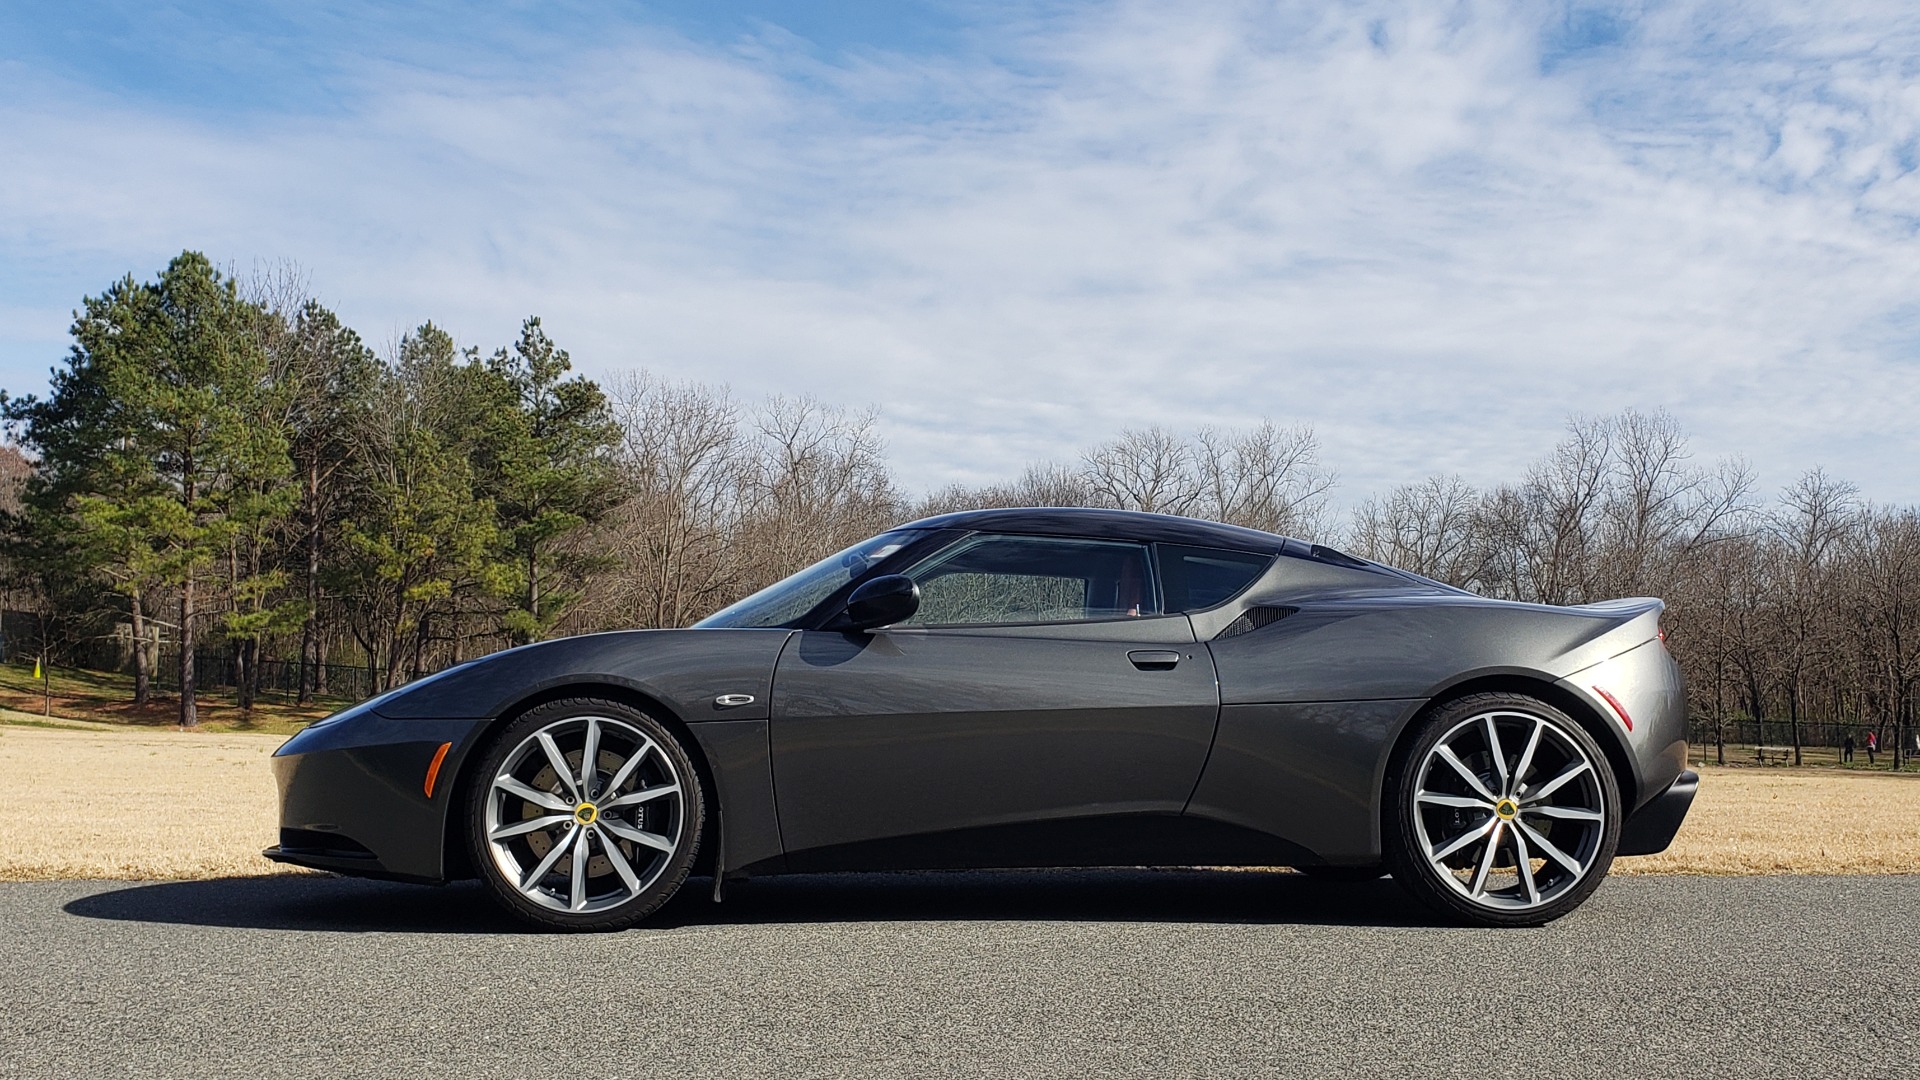 Used 2011 Lotus EVORA S 2+2 / 3.5L V6 / 6-SPD MANUAL / PIONEER / REARVIEW / LOW MILES for sale Sold at Formula Imports in Charlotte NC 28227 4